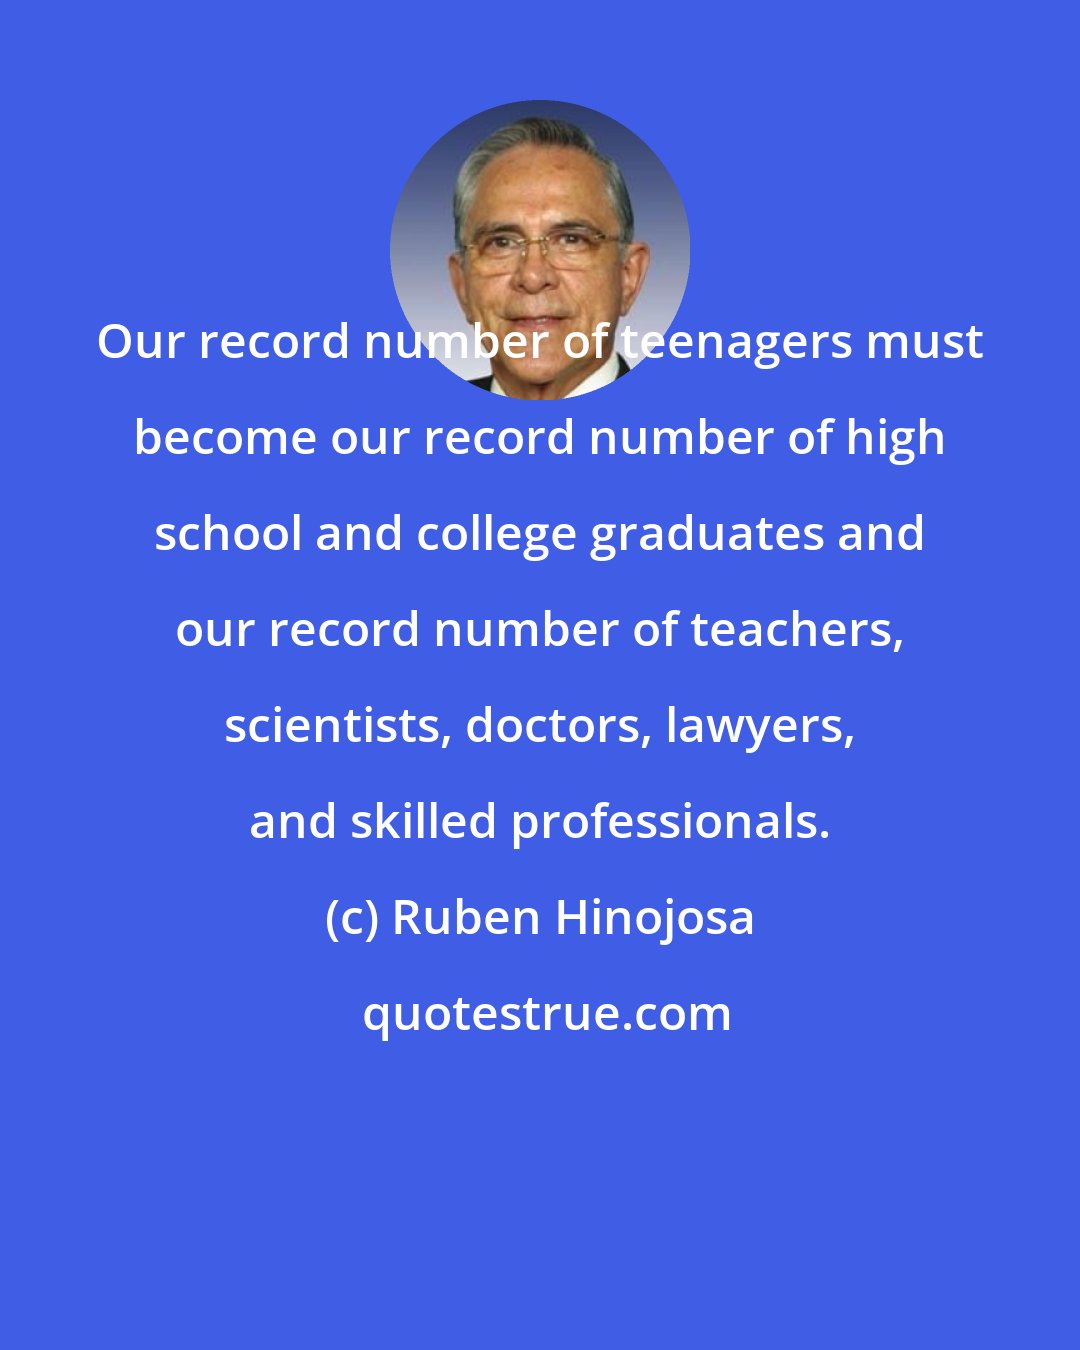 Ruben Hinojosa: Our record number of teenagers must become our record number of high school and college graduates and our record number of teachers, scientists, doctors, lawyers, and skilled professionals.